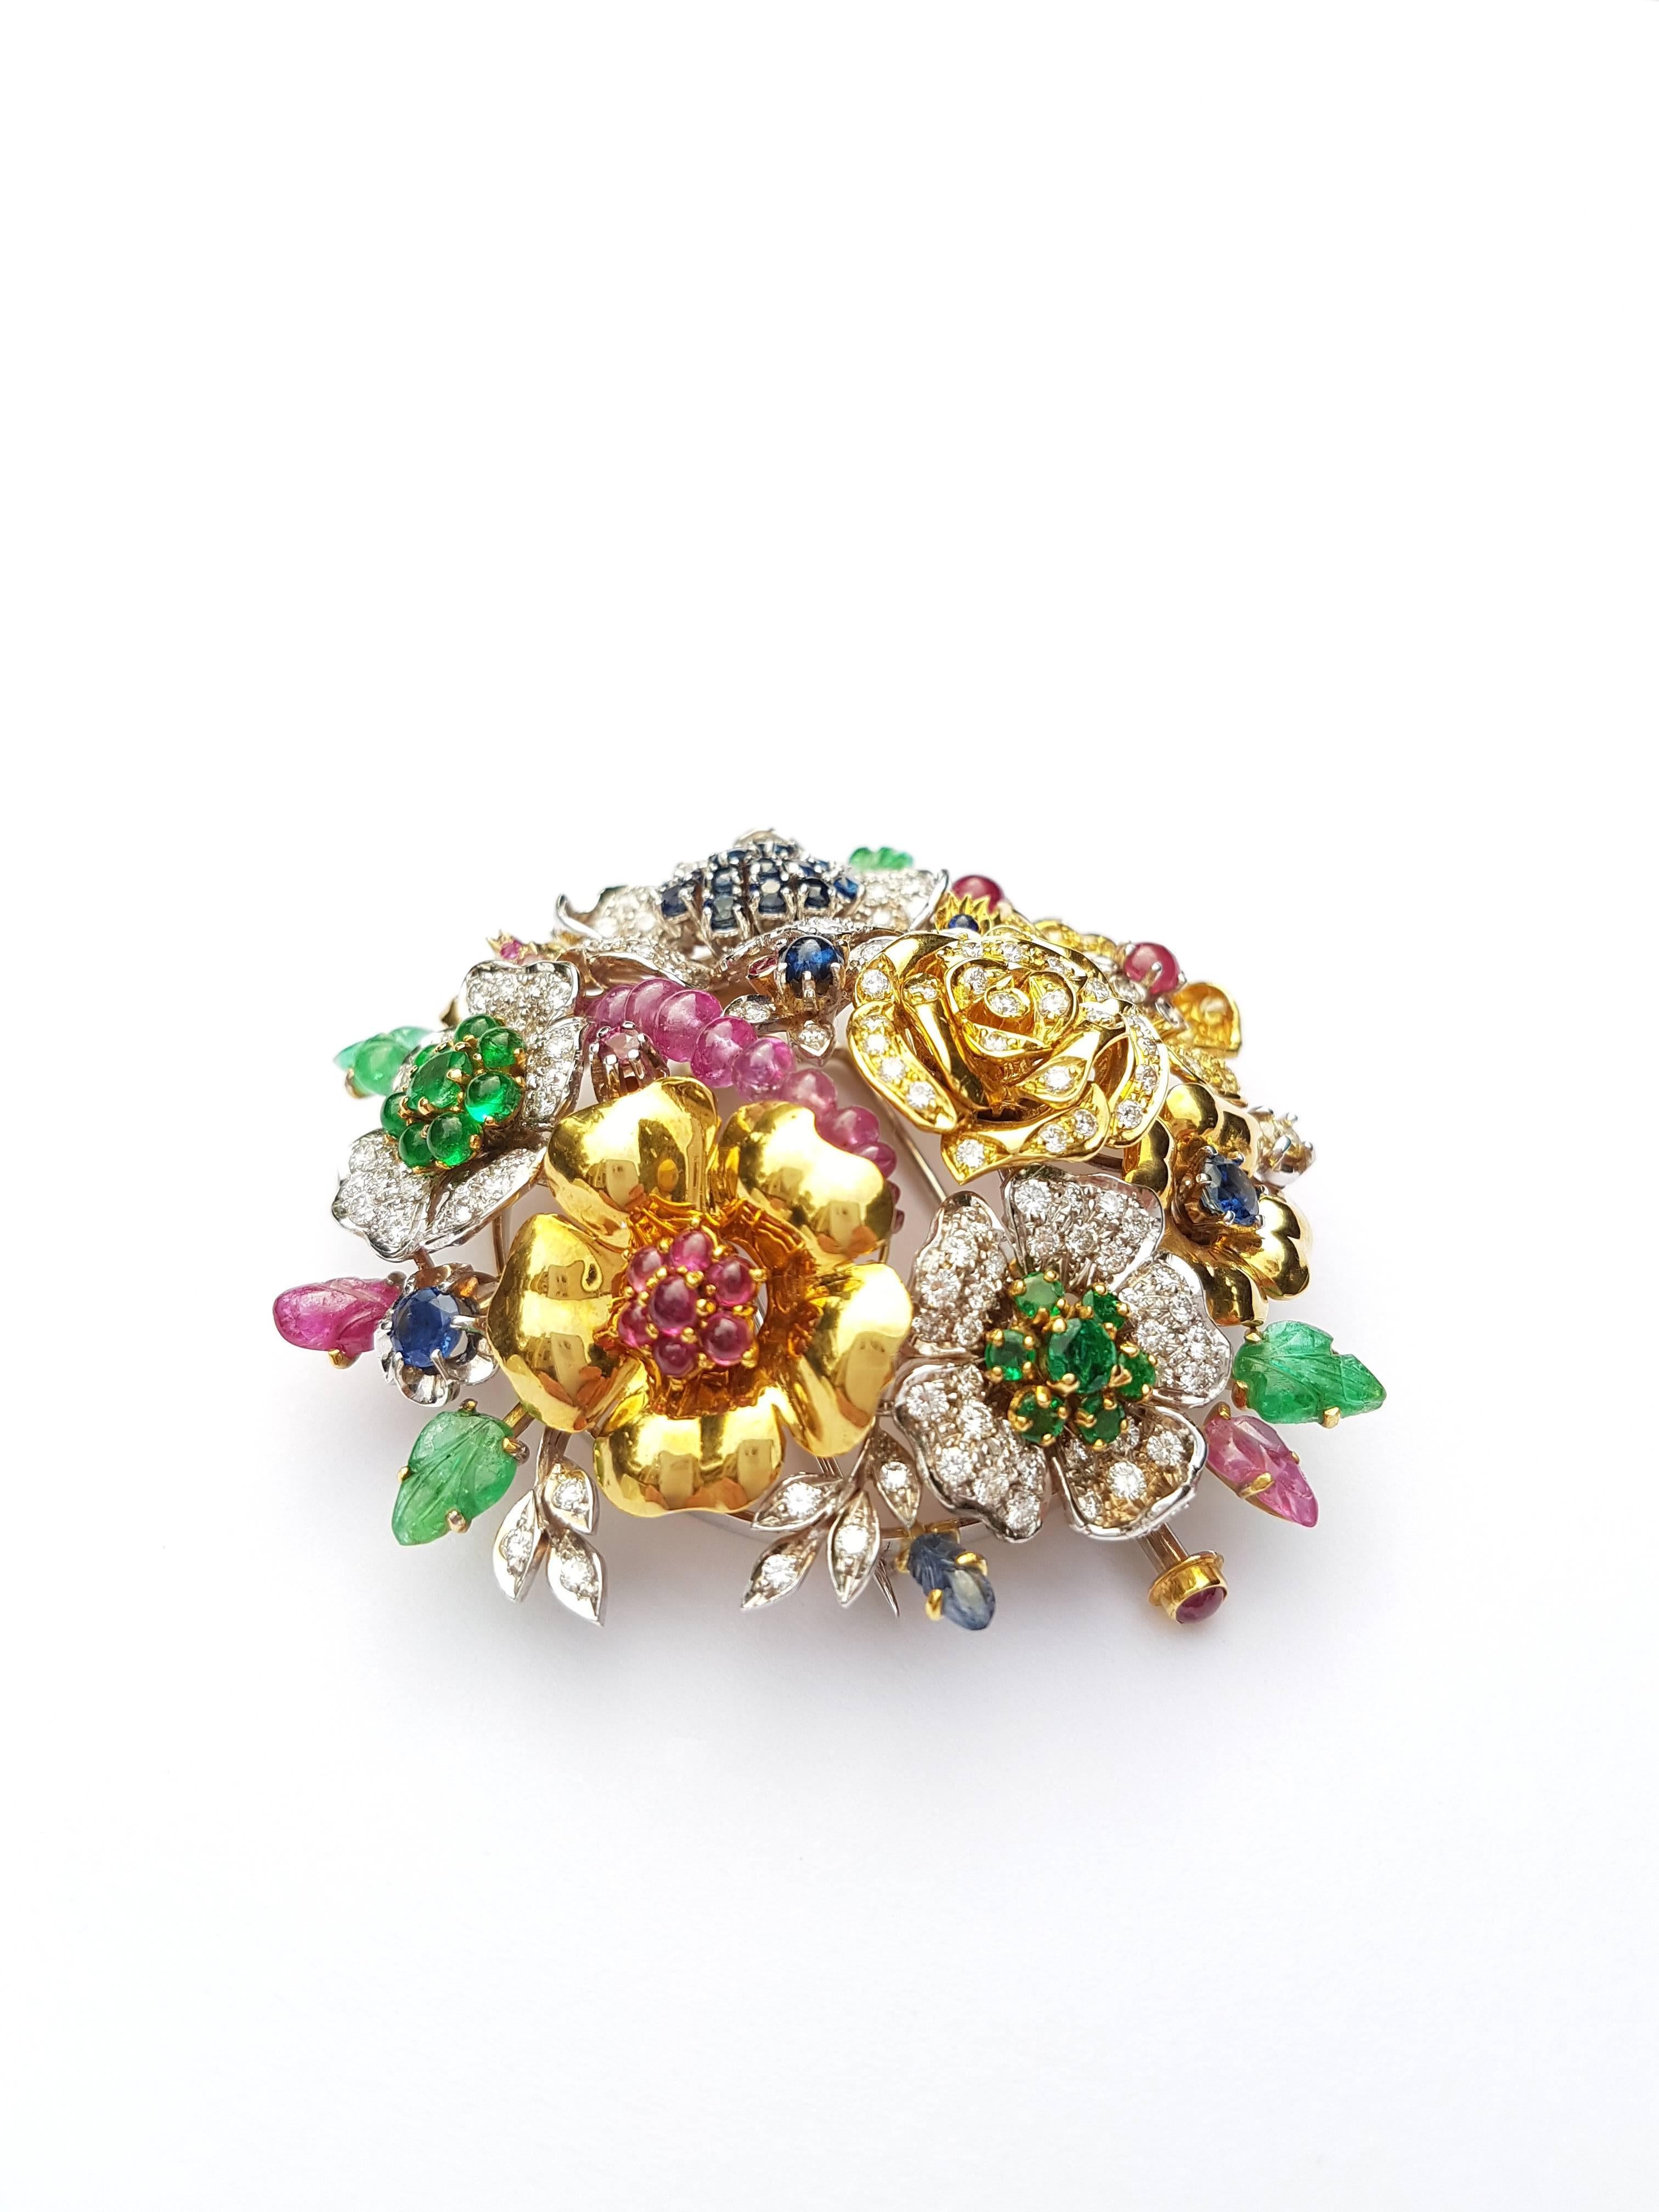 Missiaglia Flower Brooch In Excellent Condition For Sale In Venice, IT